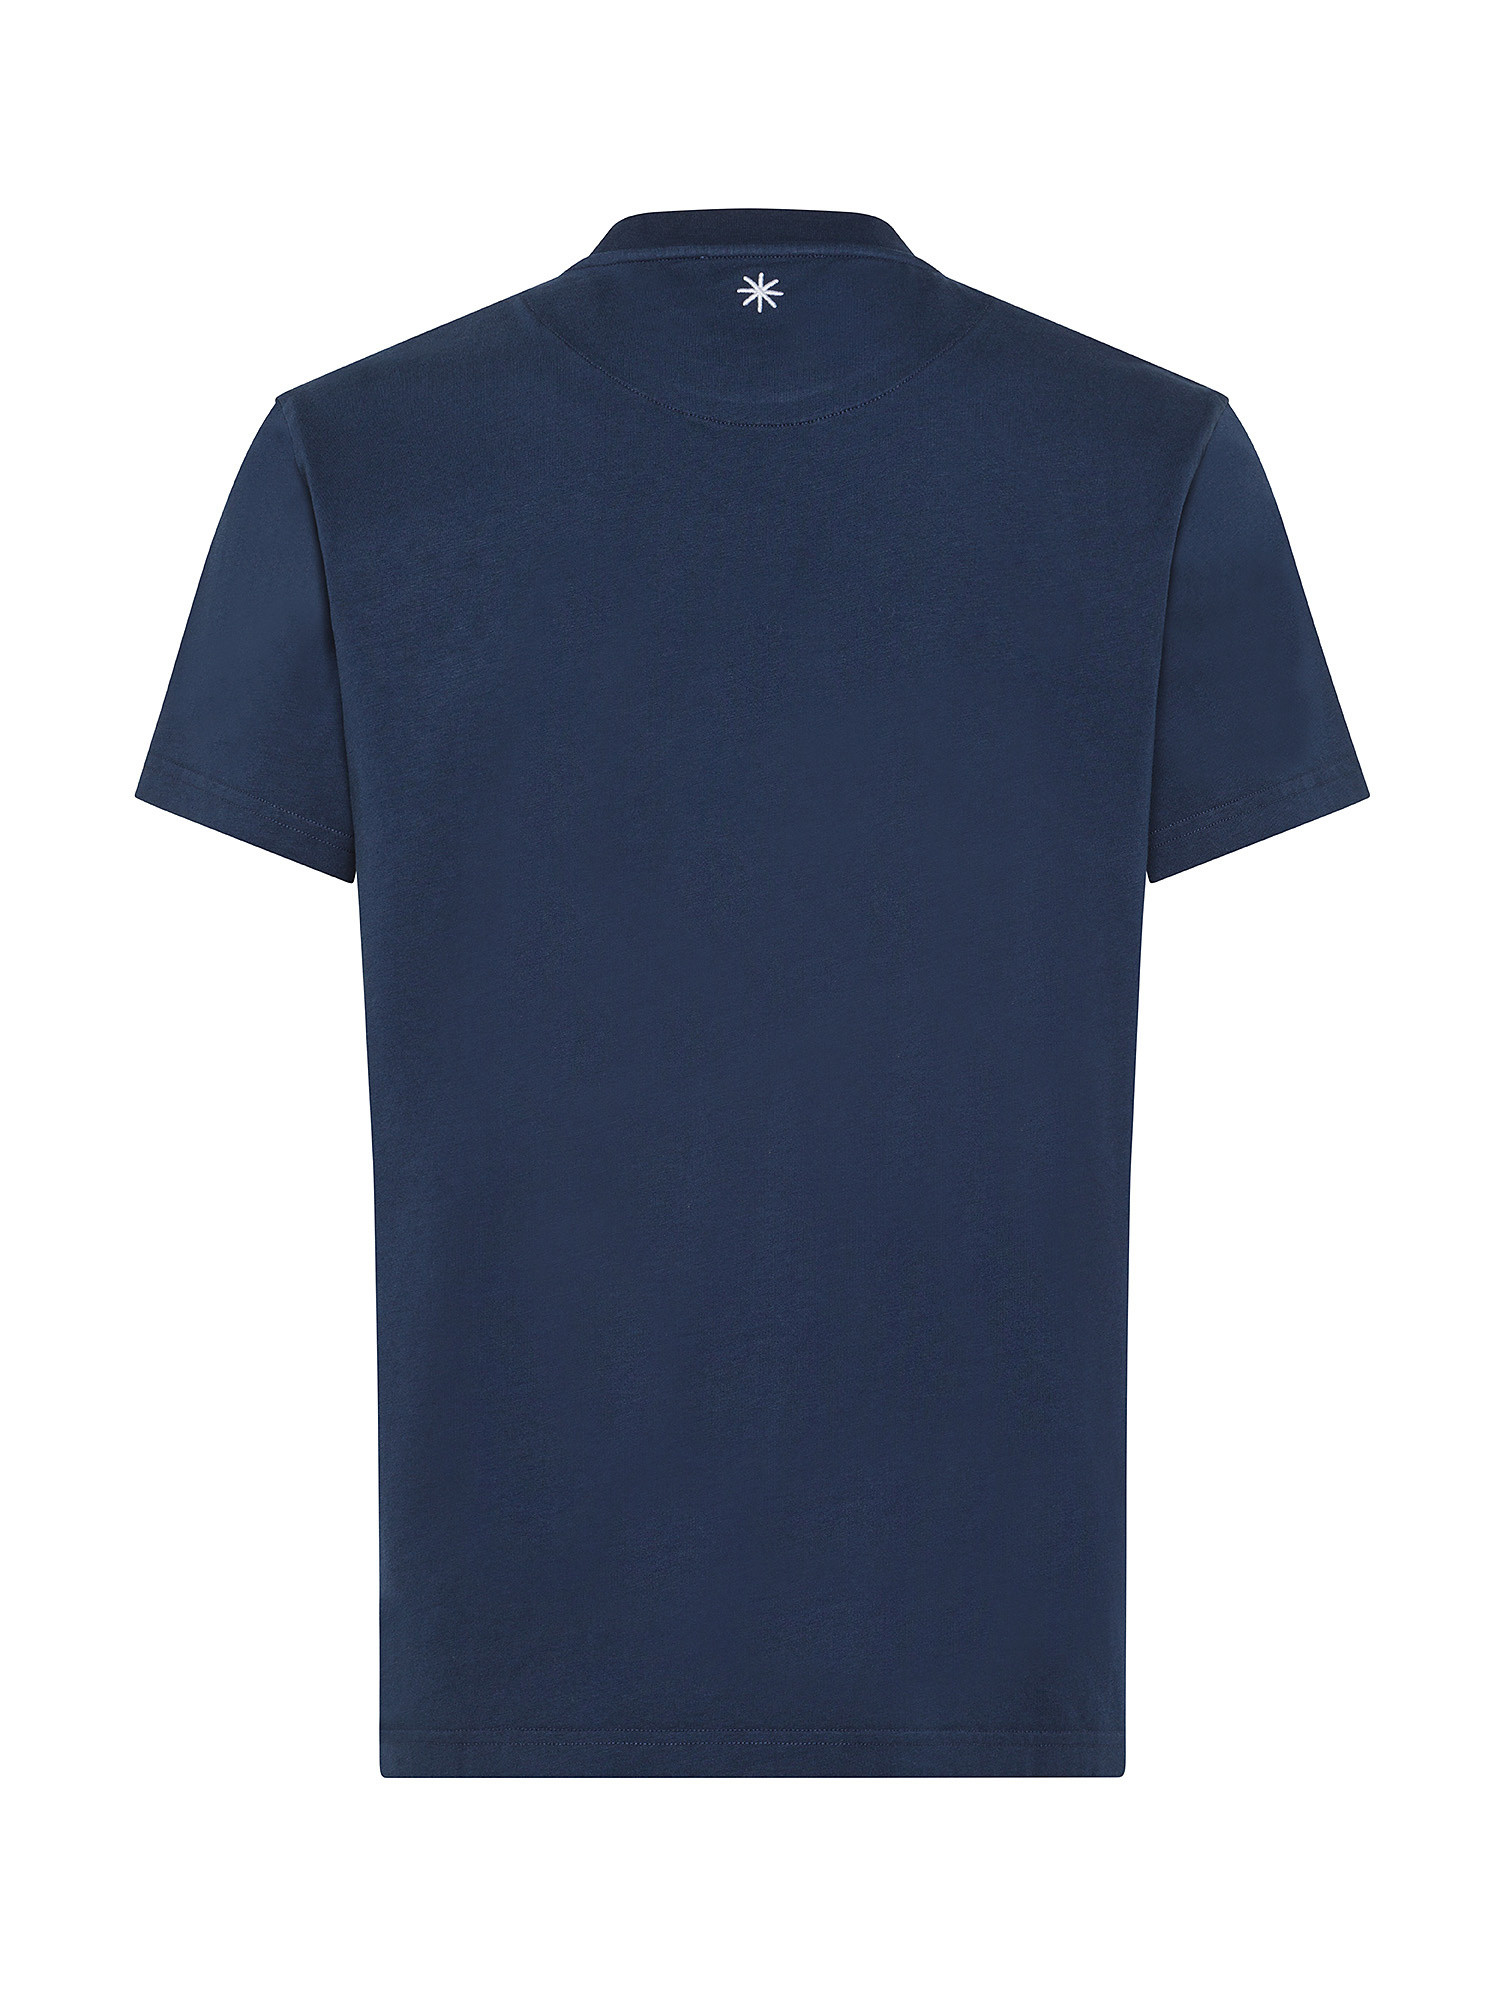 Manuel Ritz - T-shirt in cotone, Blu scuro, large image number 1